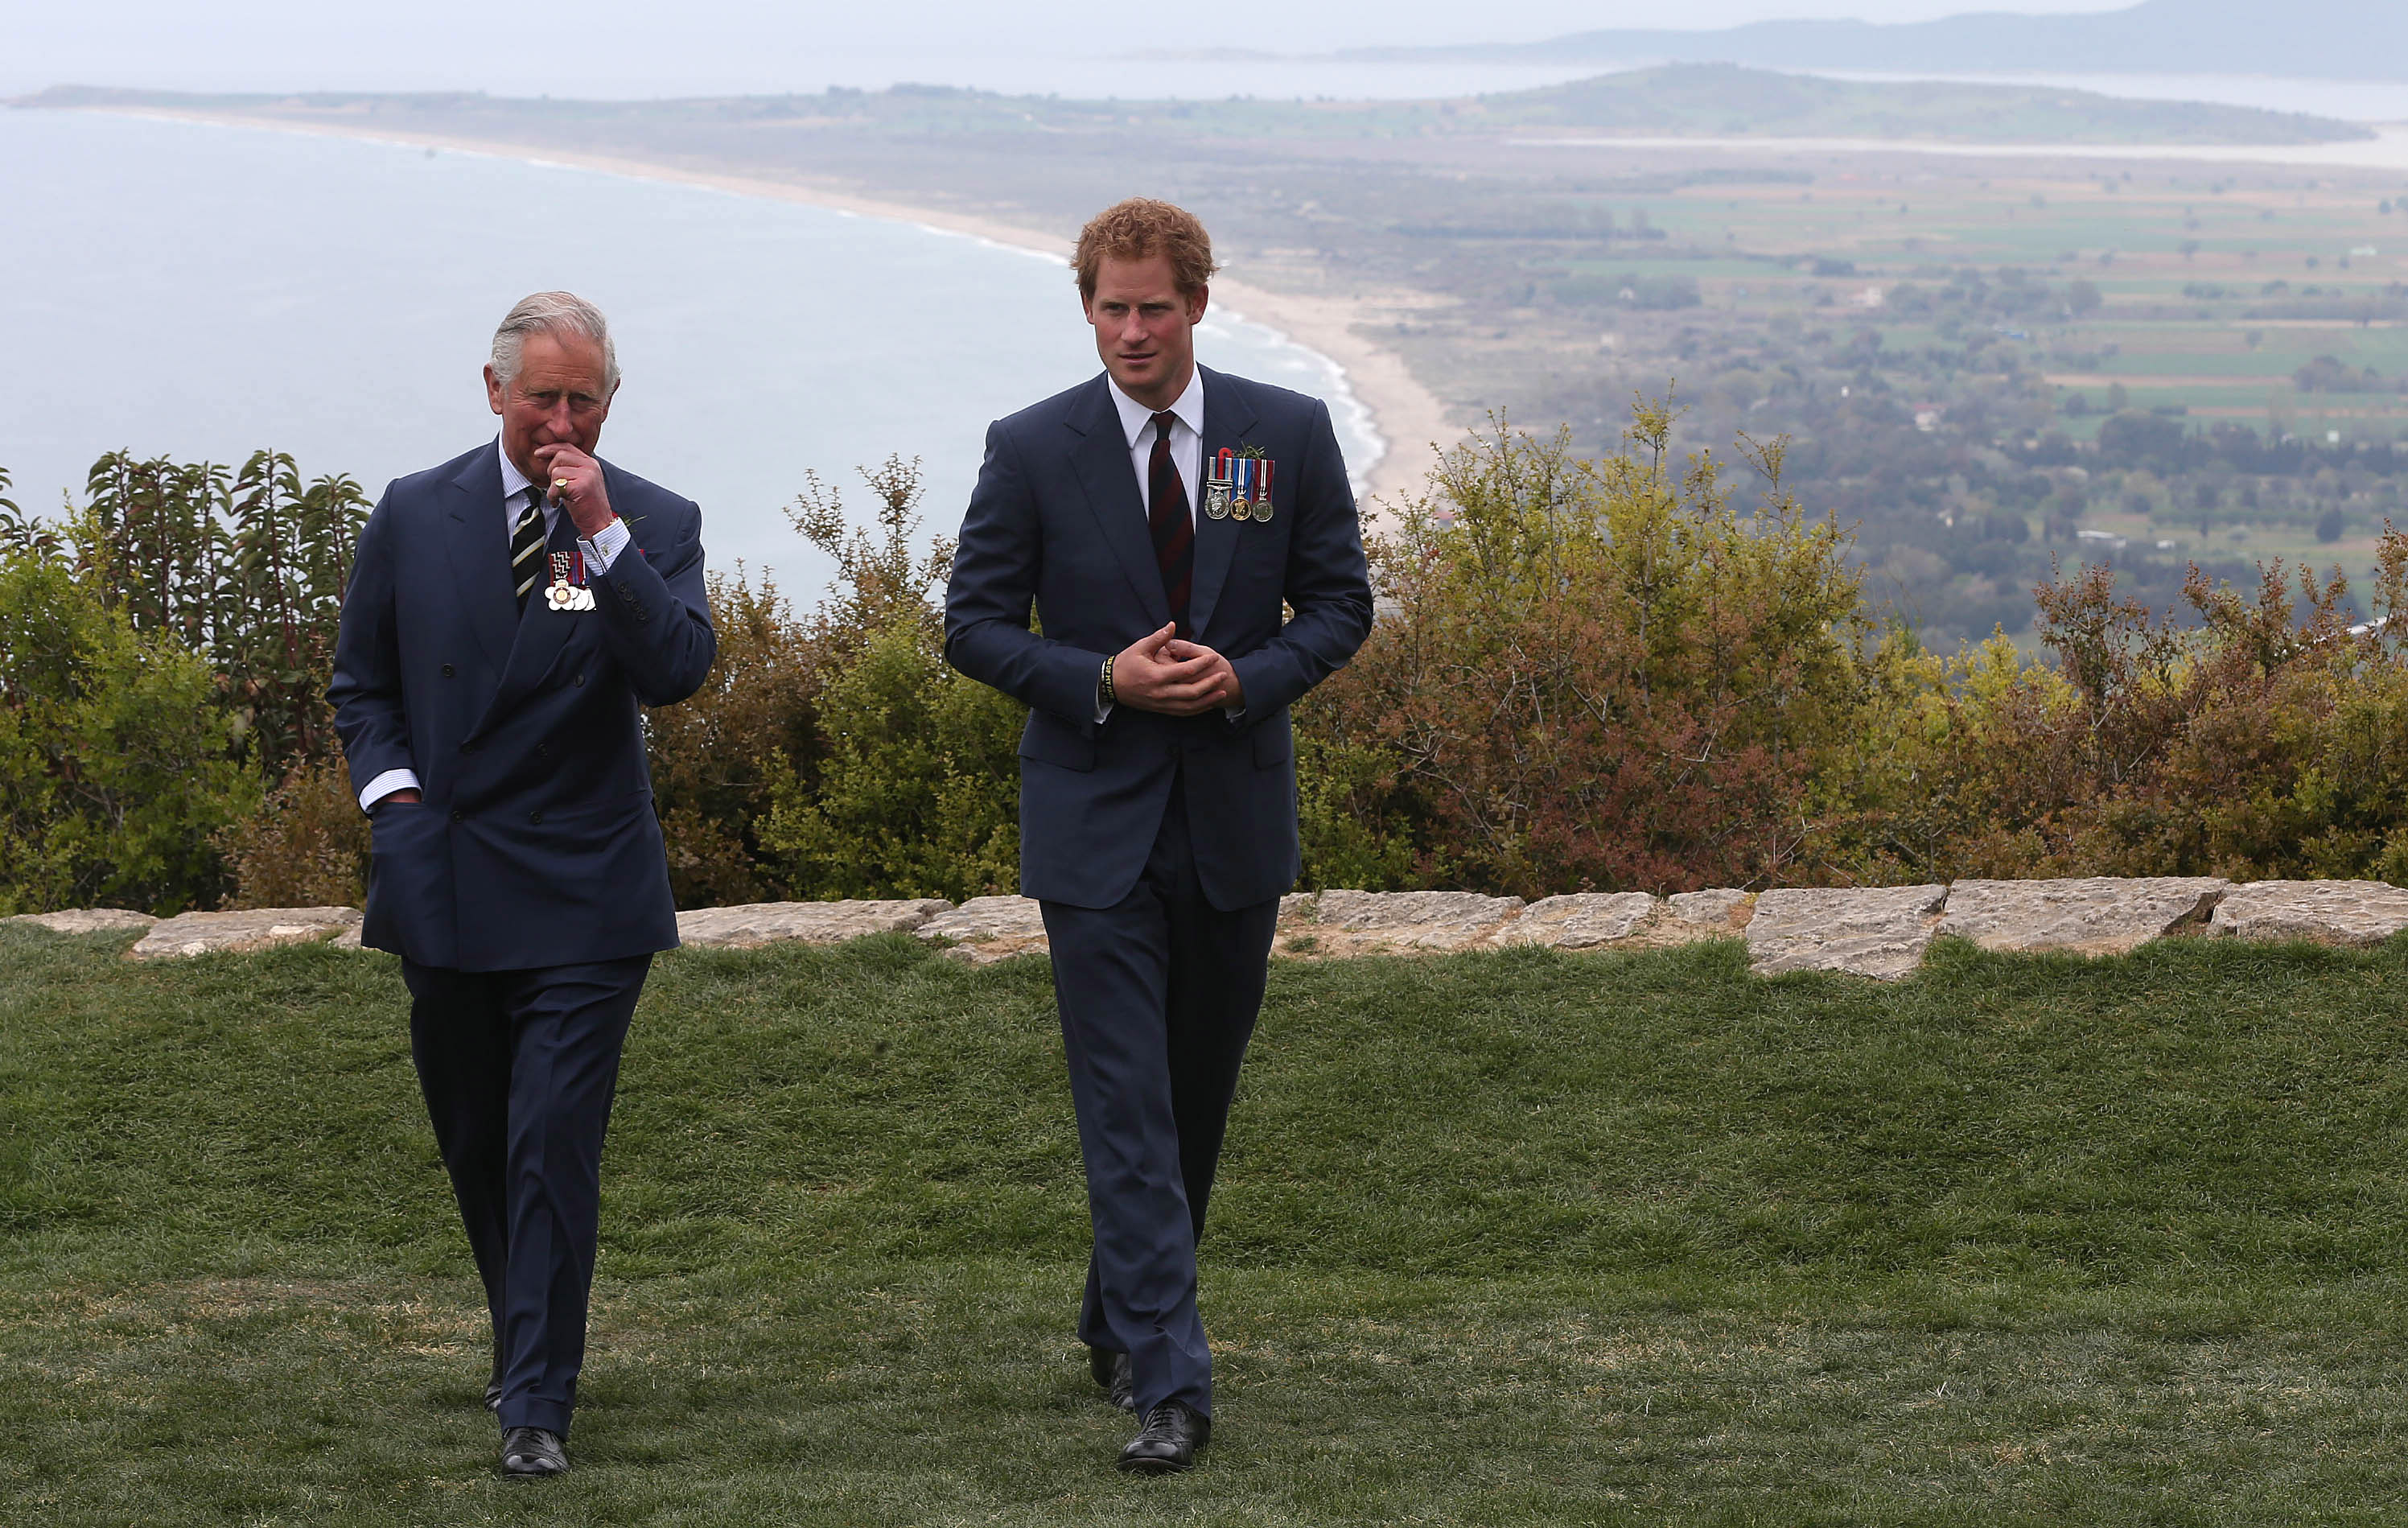 Prince Harry with King Charles III in Turkey in 2015 | Source: Getty Images